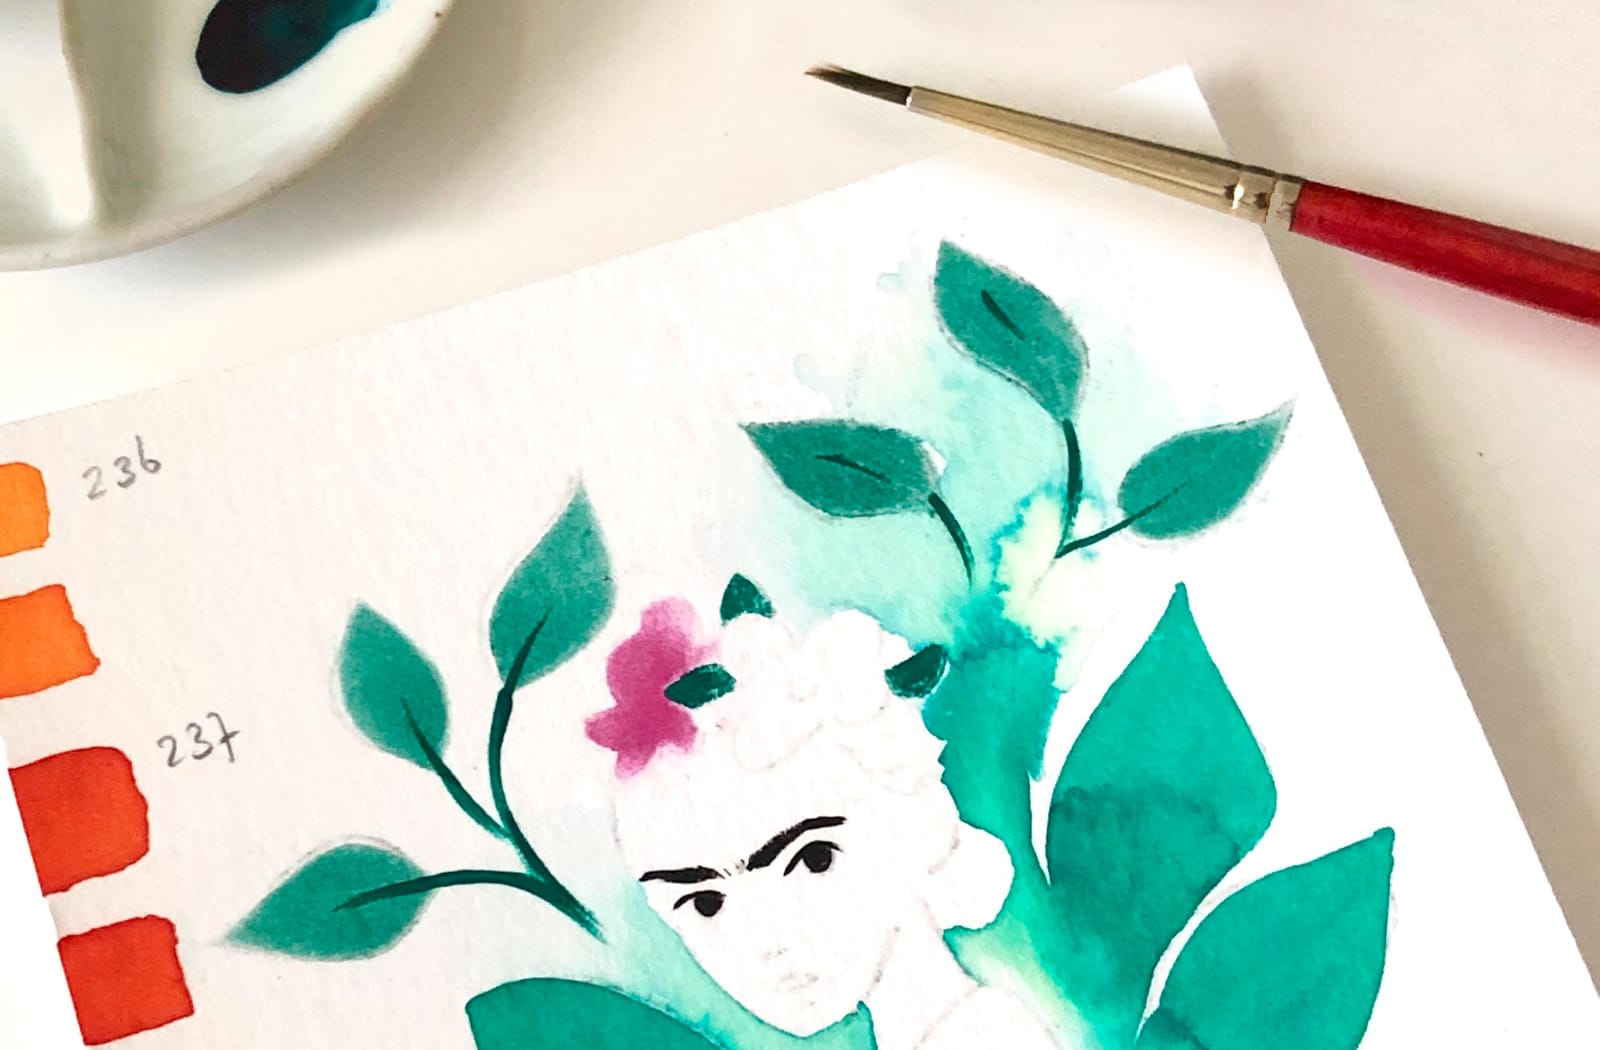 An unfinished illustration of Frida Kahlo surrounded by leaves also a brush and cropped ceramic palette is visible.